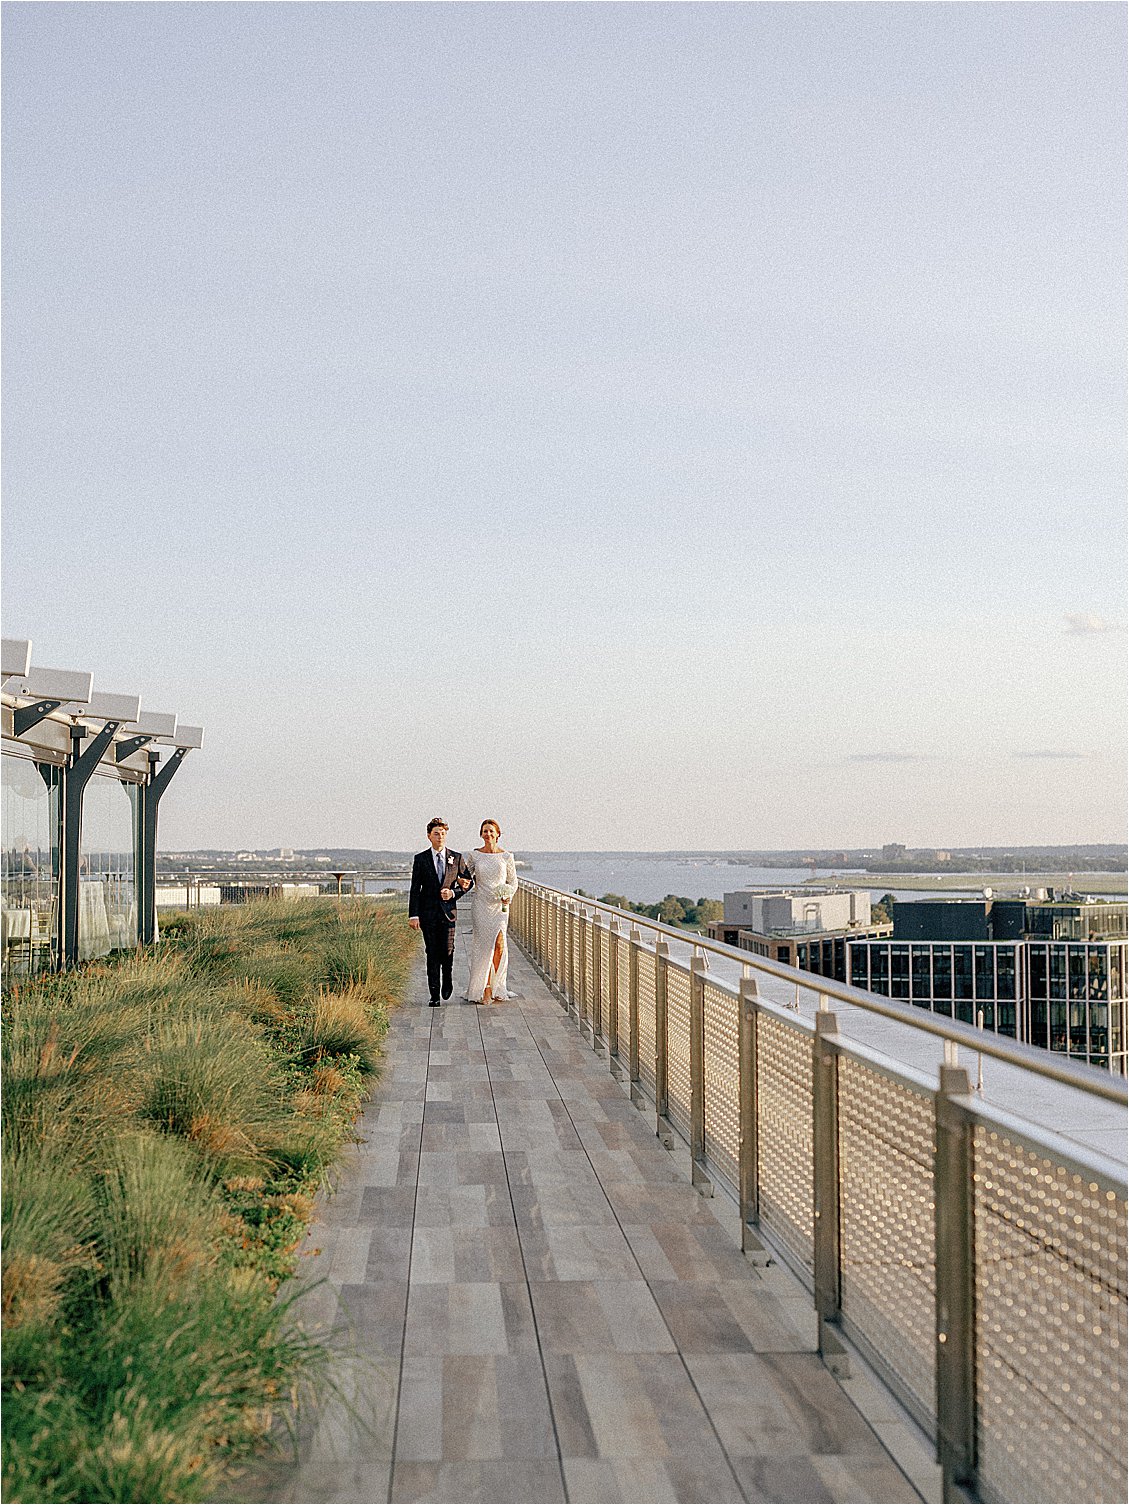 Son walks Mom down the aisle for Rooftop DC Wedding with Renee Hollingshead and A Griffin Events